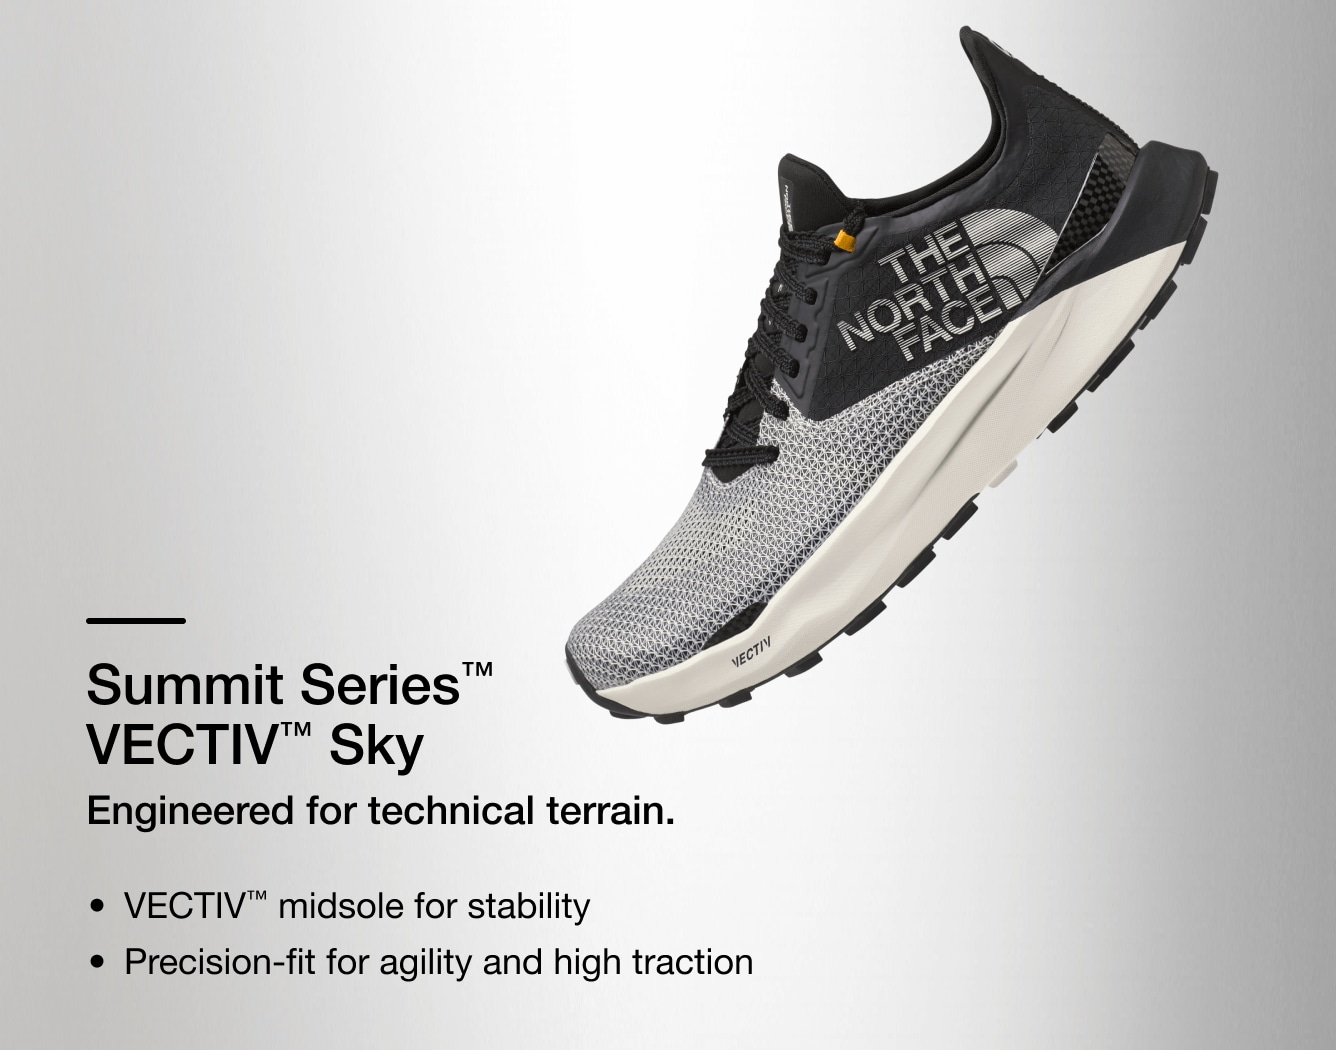 Studio shot of the VECTIV Sky trail running shoe from The North Face with text overlay detailing features.